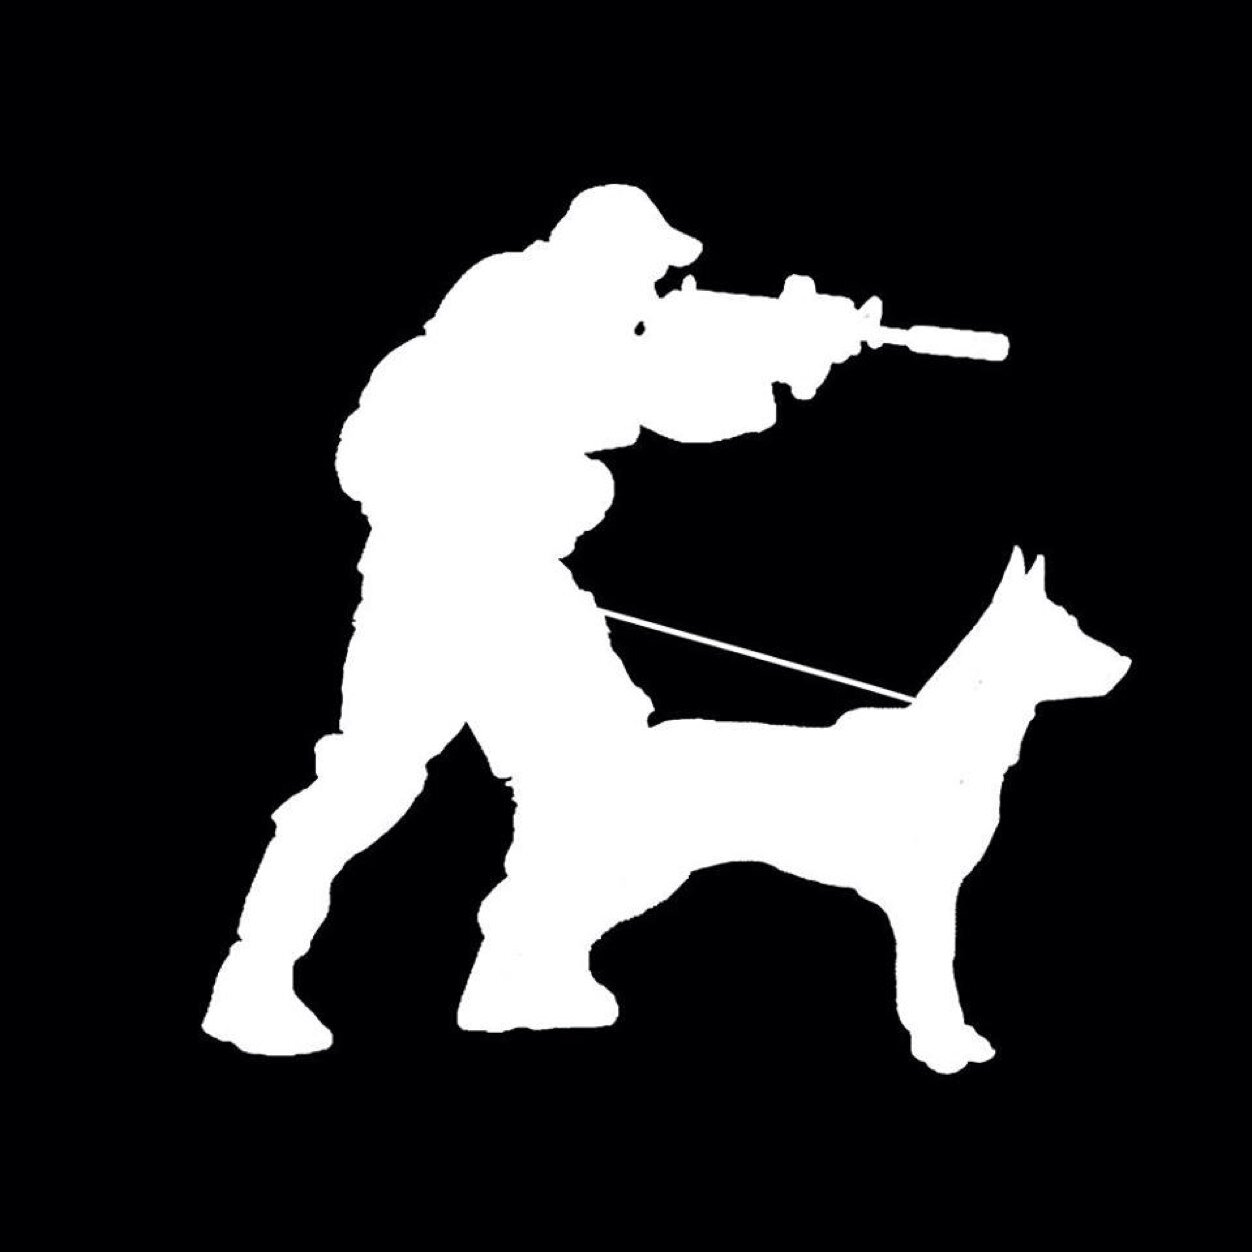 HITS Handler Instruction Training Seminar. Worlds largest LEO K9 conference. Bringing advanced & specialized K9 training to you! Real training by real cops.